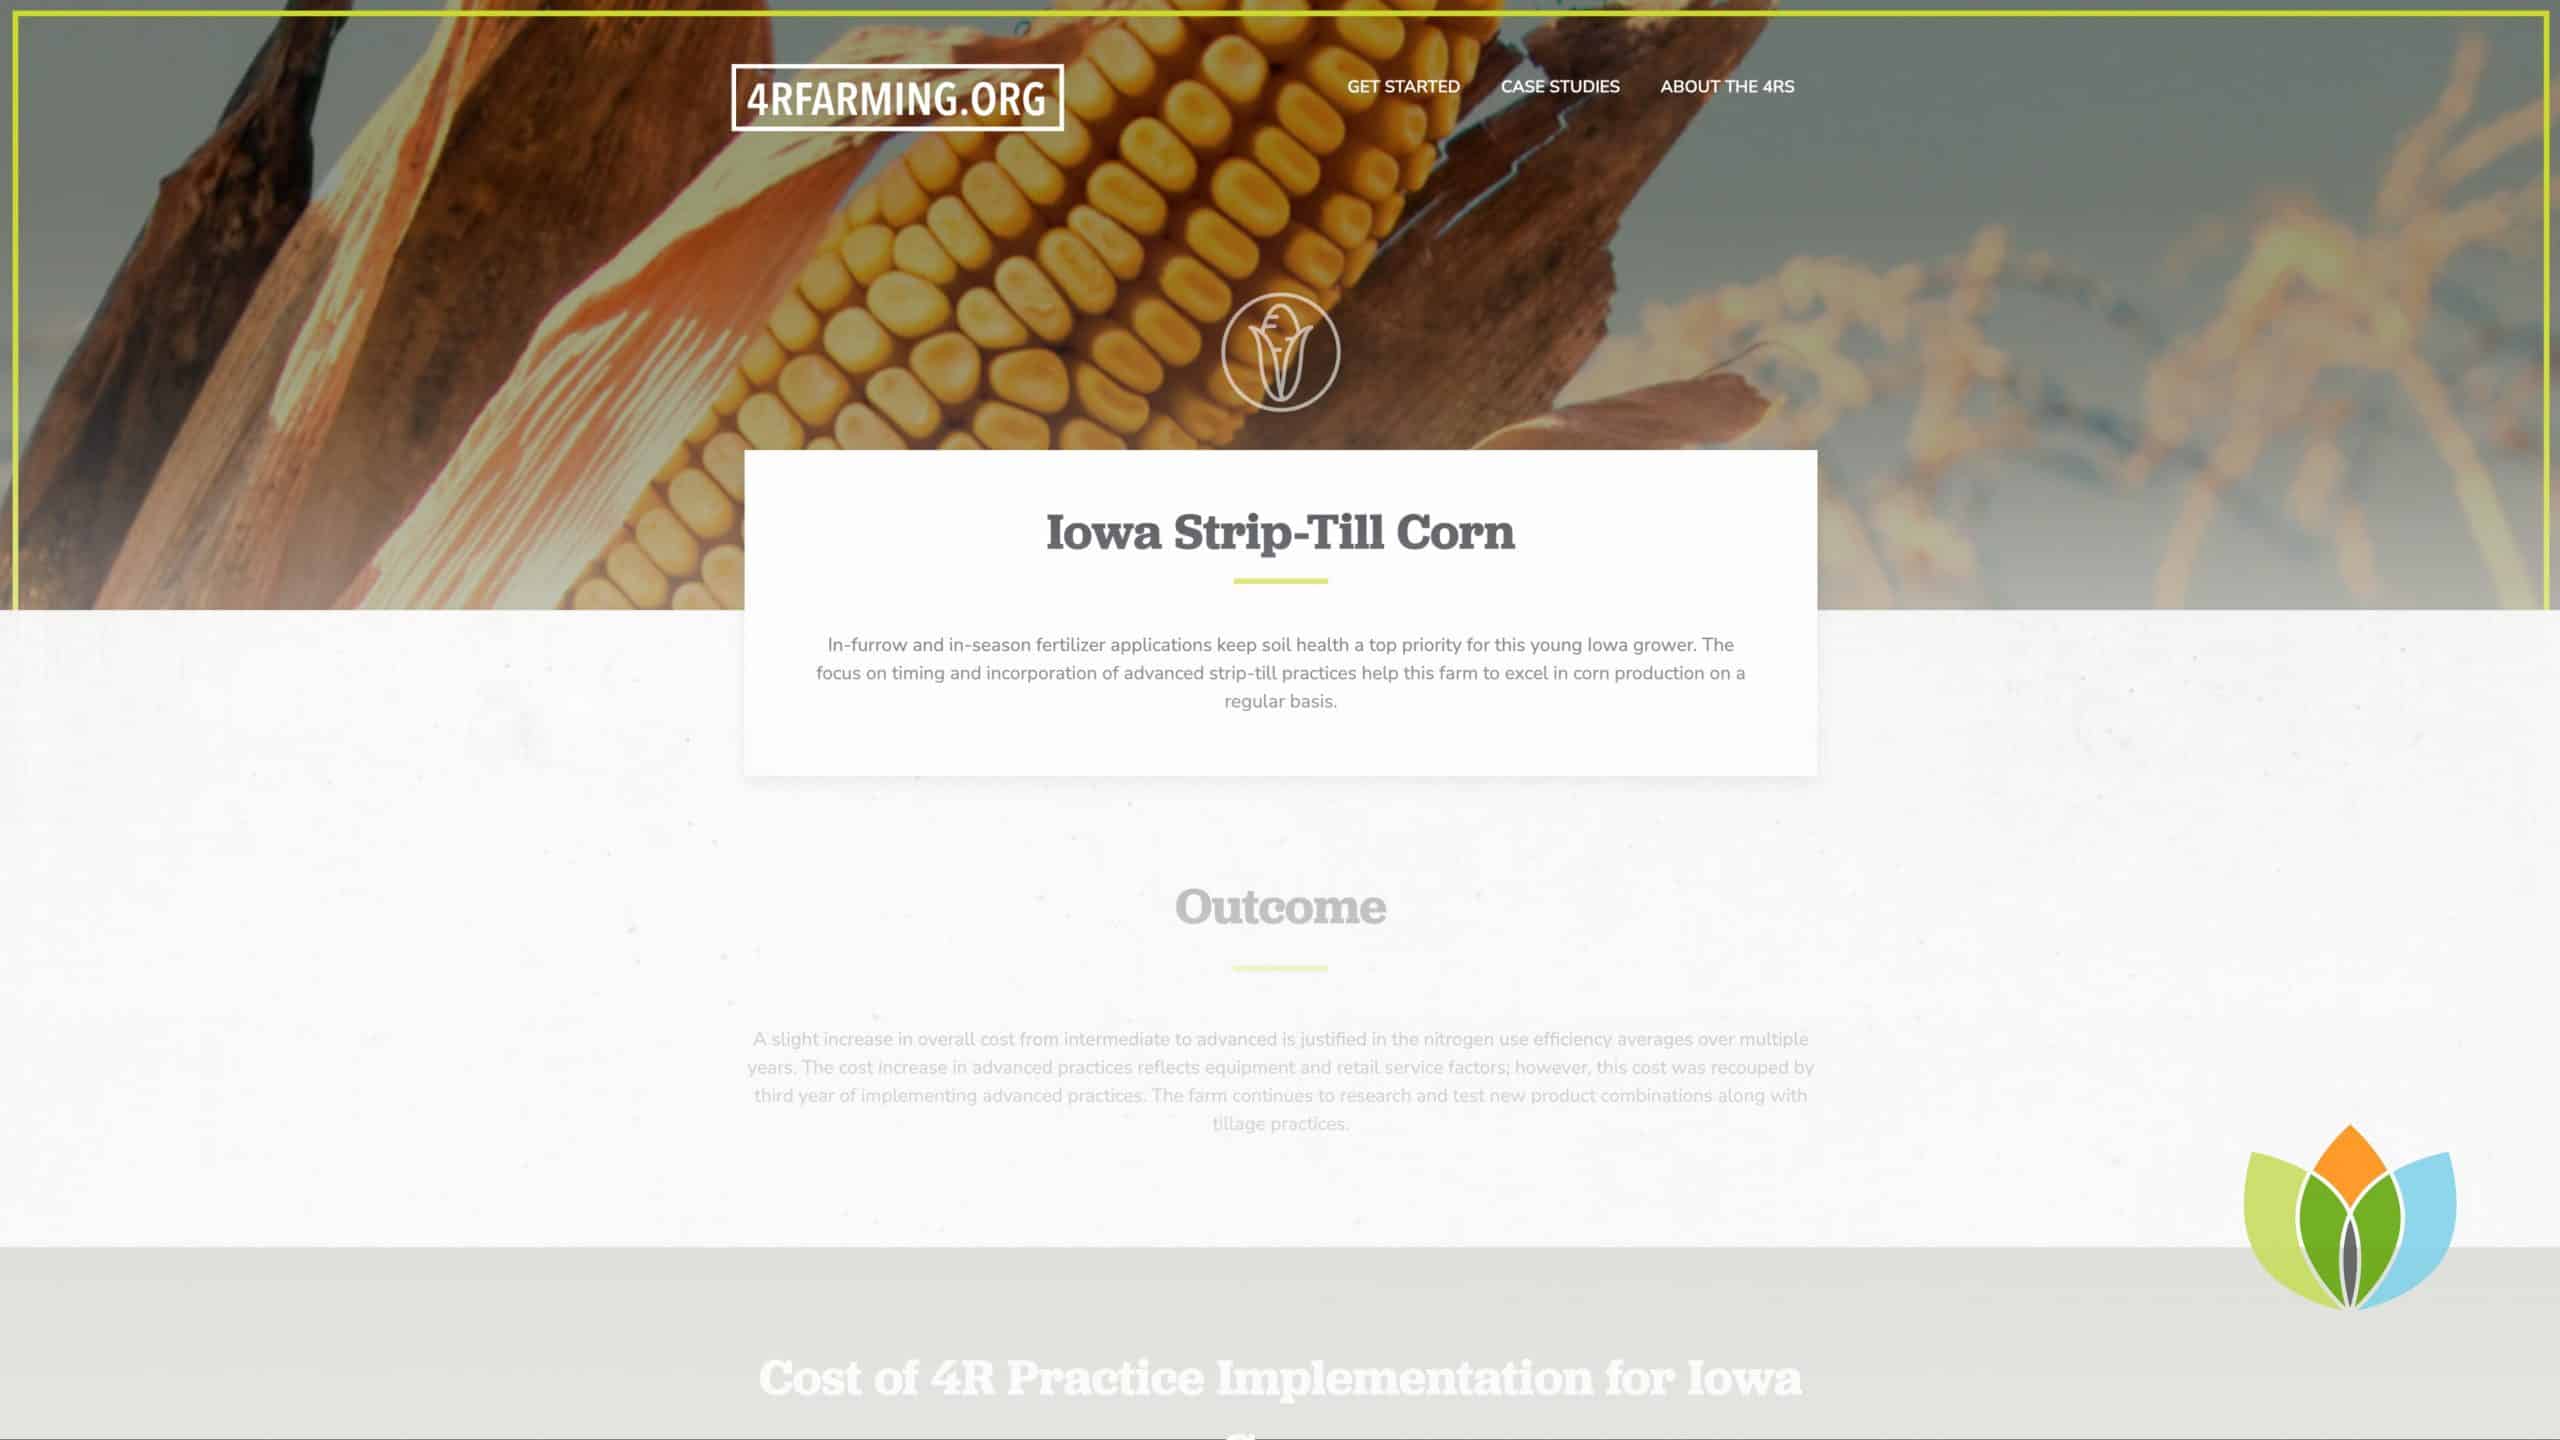 Focus on timing and advanced strip-till practices help Iowa corn farm excel